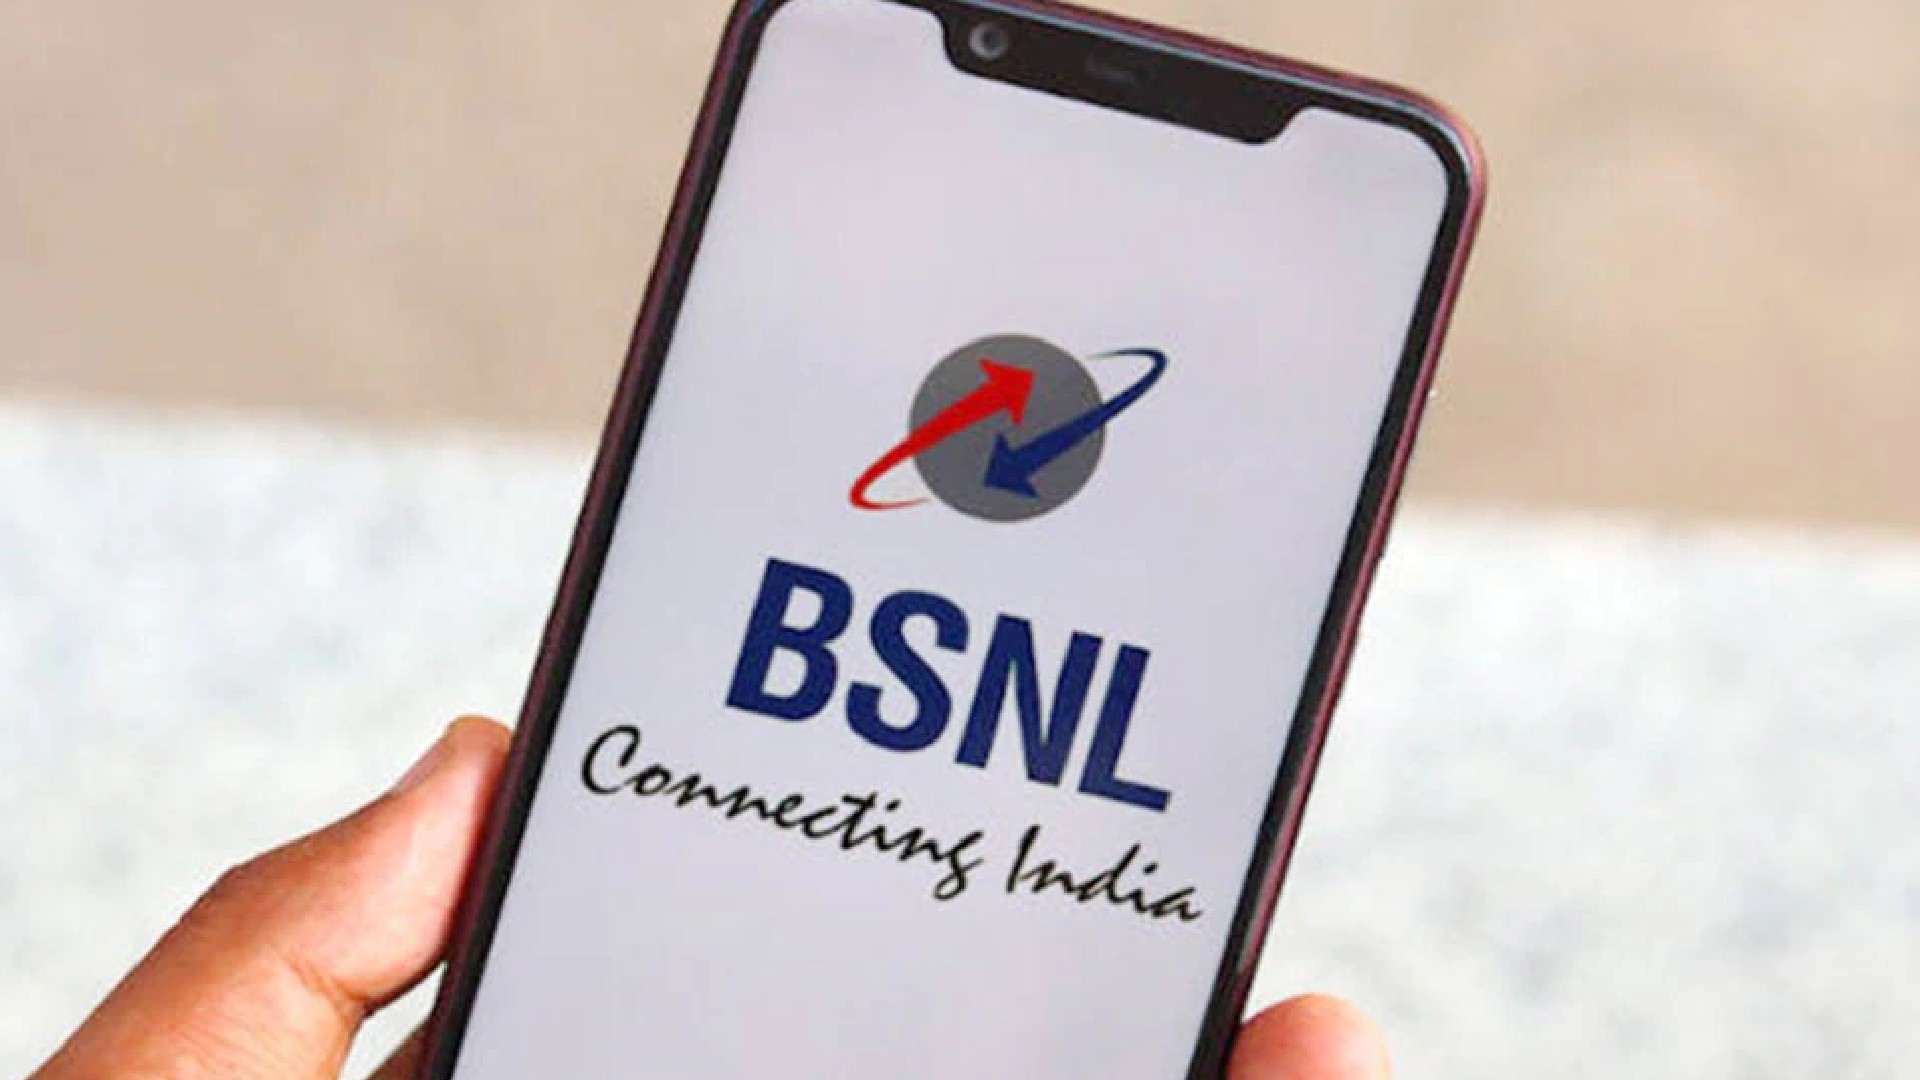 BSNL cheapest recharge plan, unlimited calls and data for just Rs 47